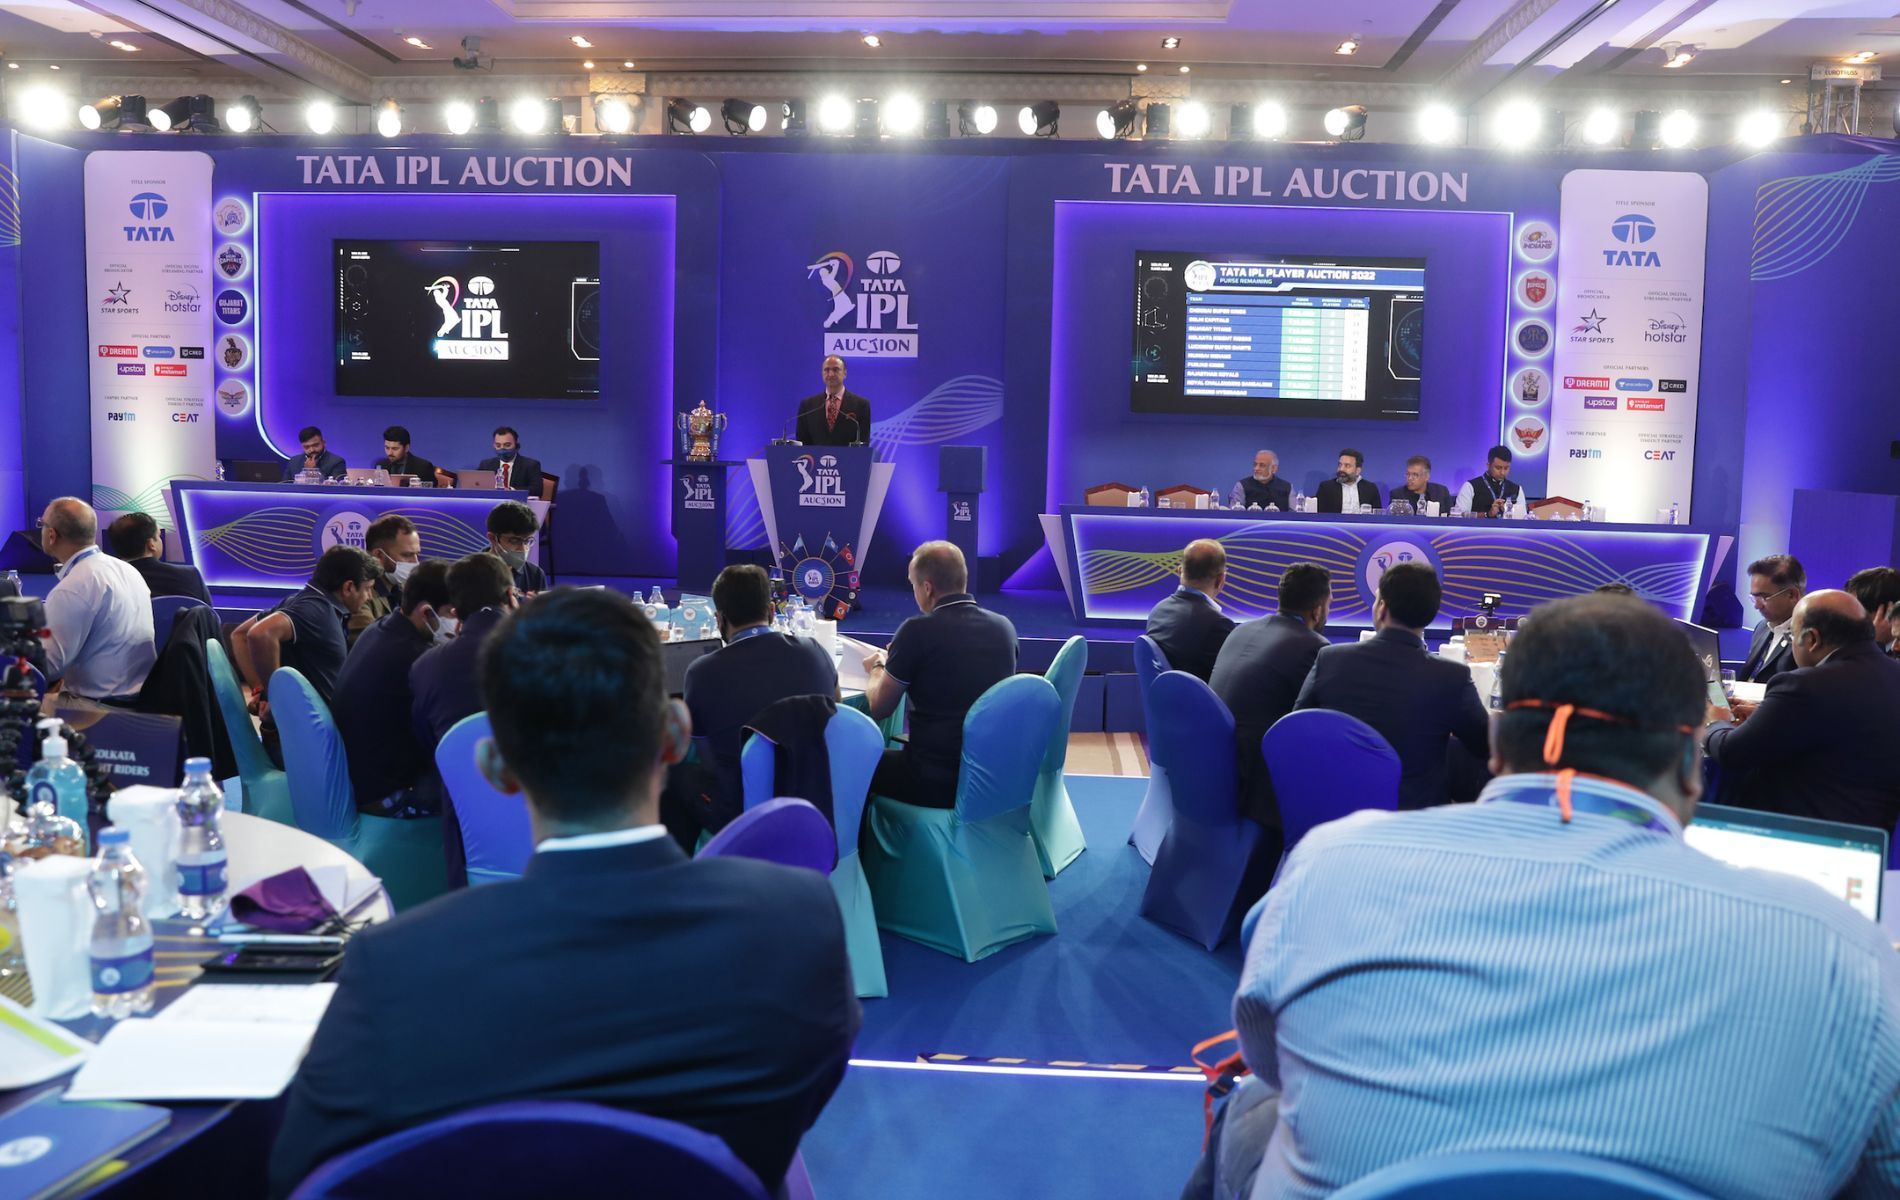 The IPL 2022 auction took place on Saturday and Sunday.